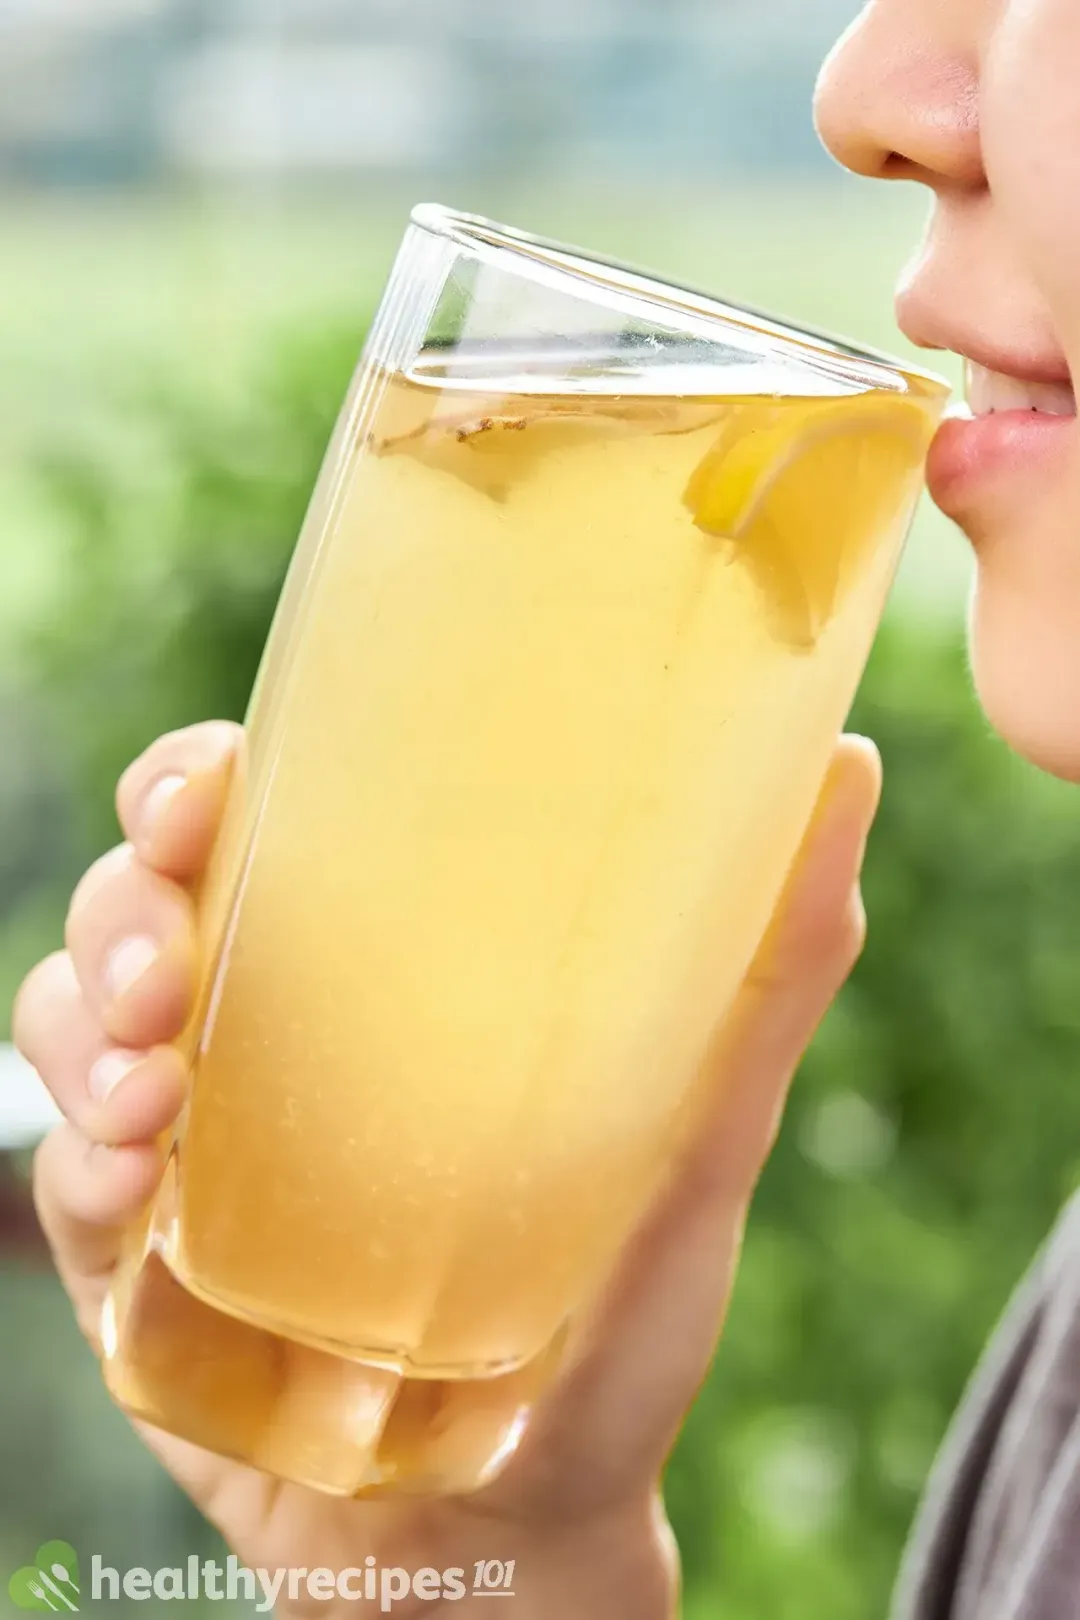 A tall glass filled with ginger and lemon honey vinegar drink held close to a mouth, about to be drunk